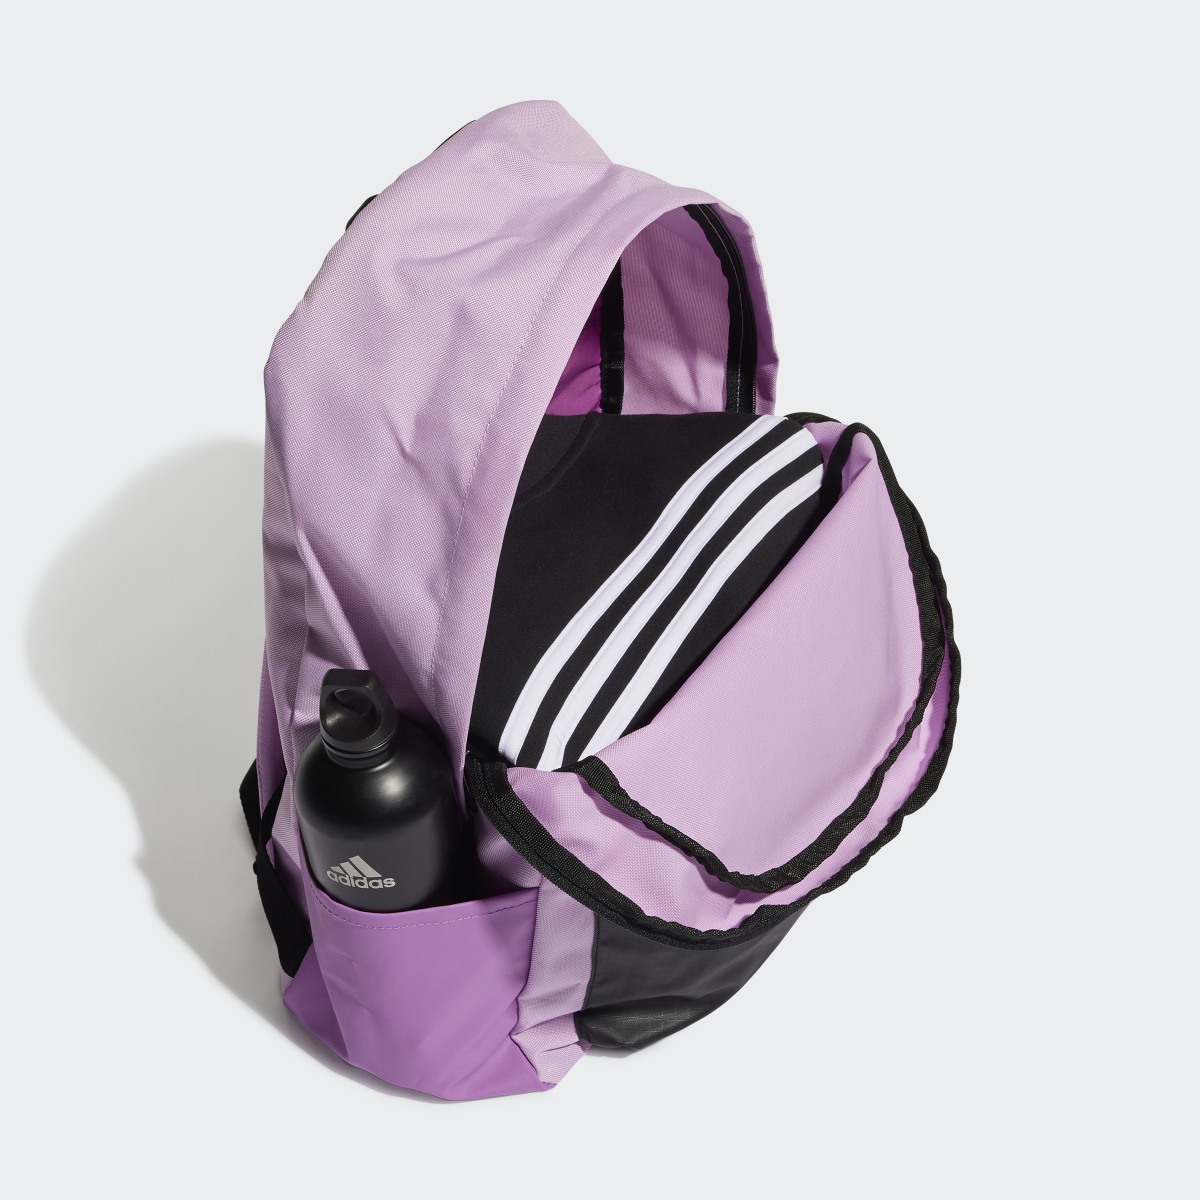 Adidas Classic Badge of Sport 3-Stripes Backpack. 5